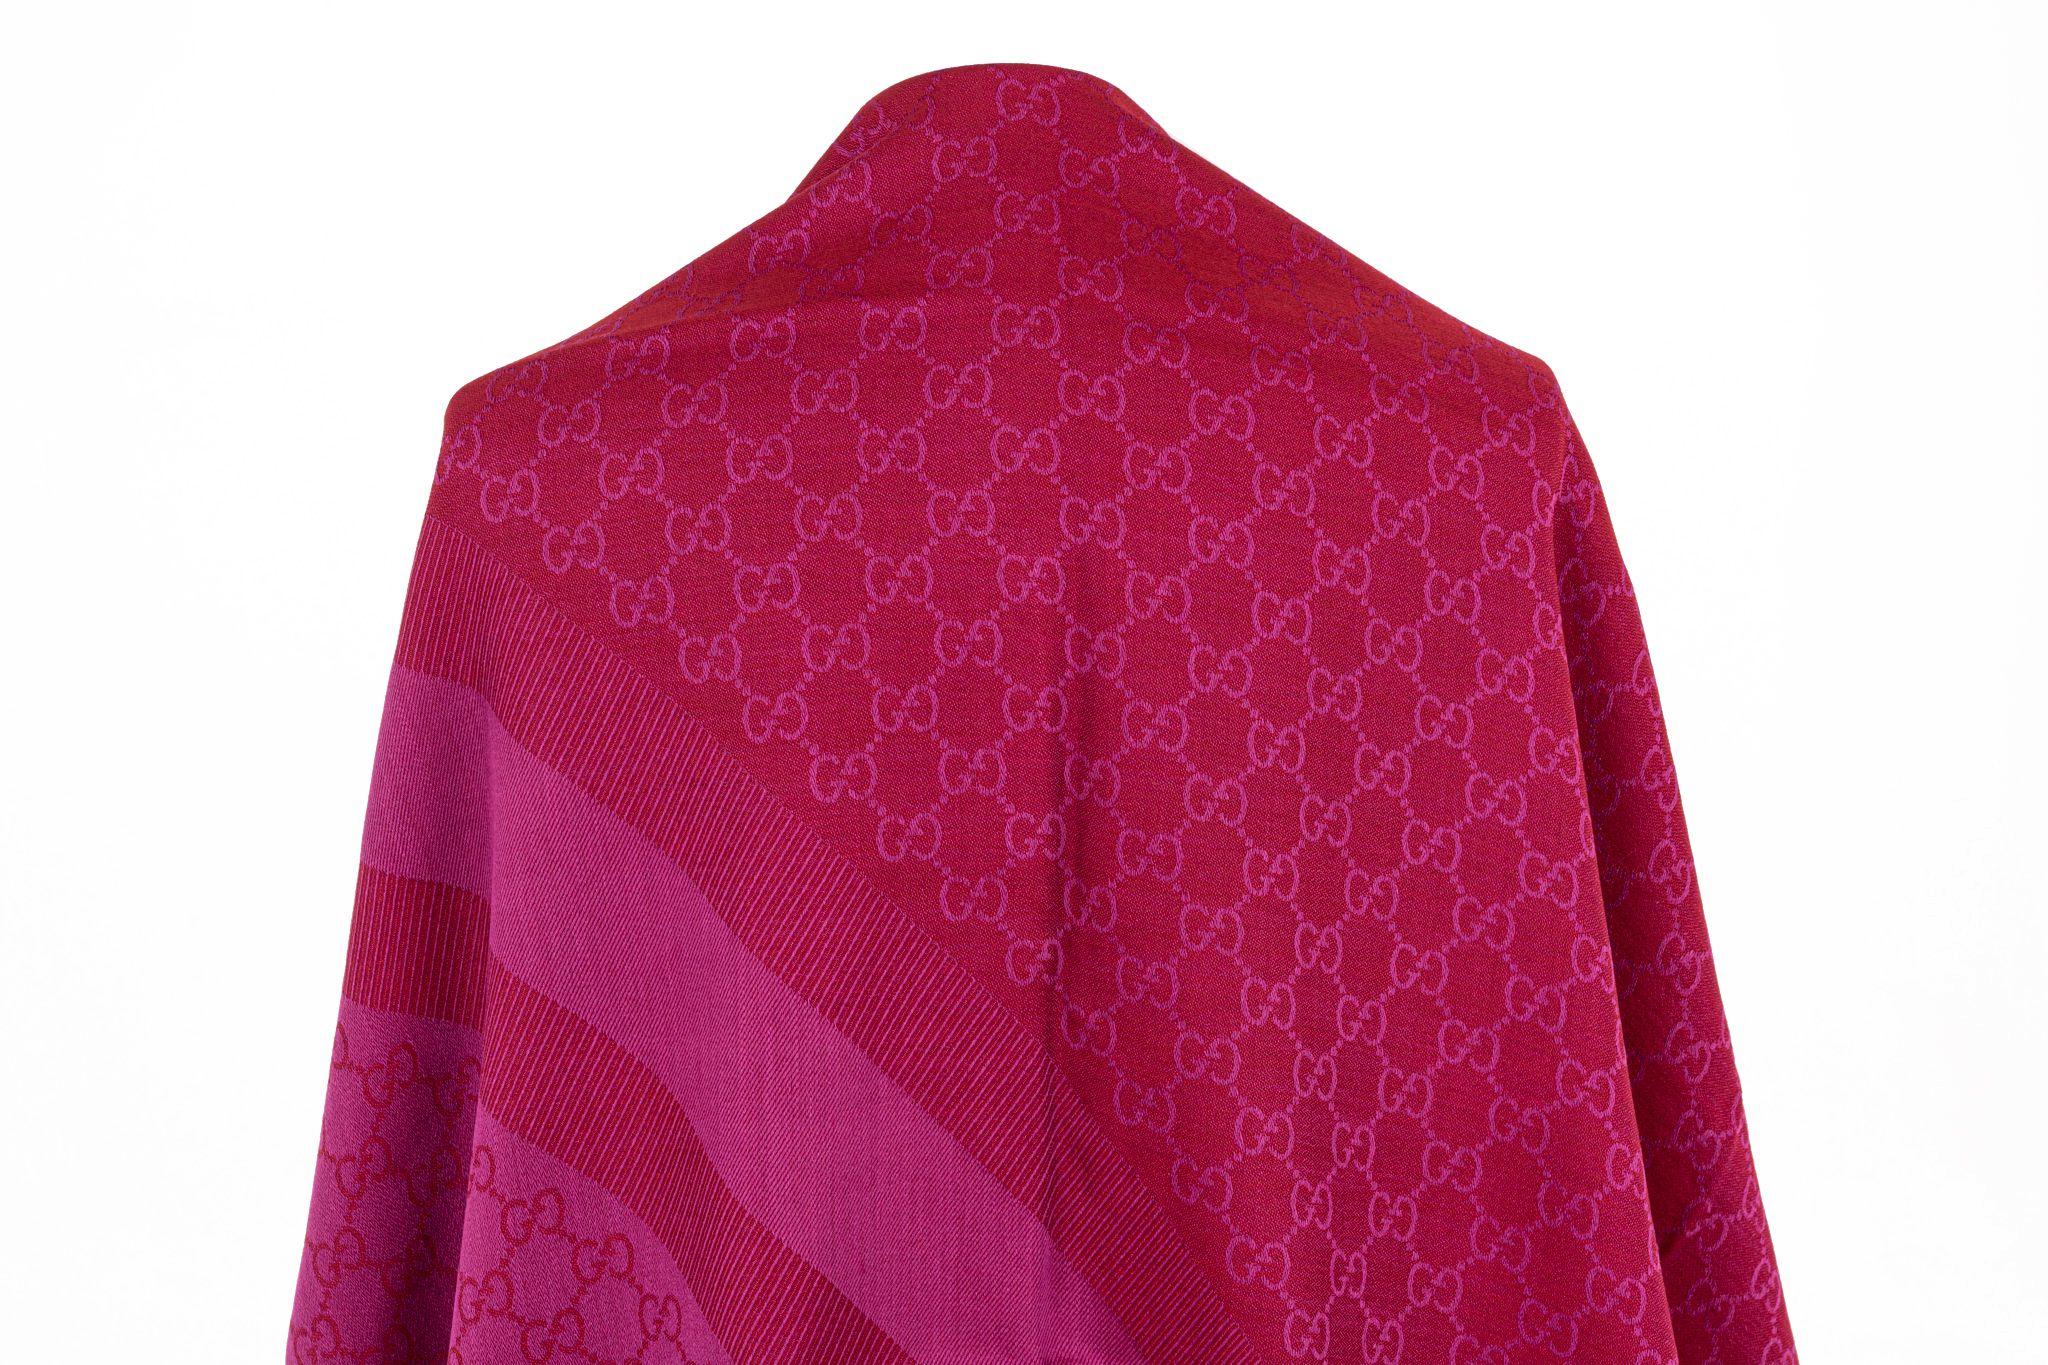 Gucci wool and silk mix shawl with a canvas print. The piece is in new condition and comes in the color fuchsia.